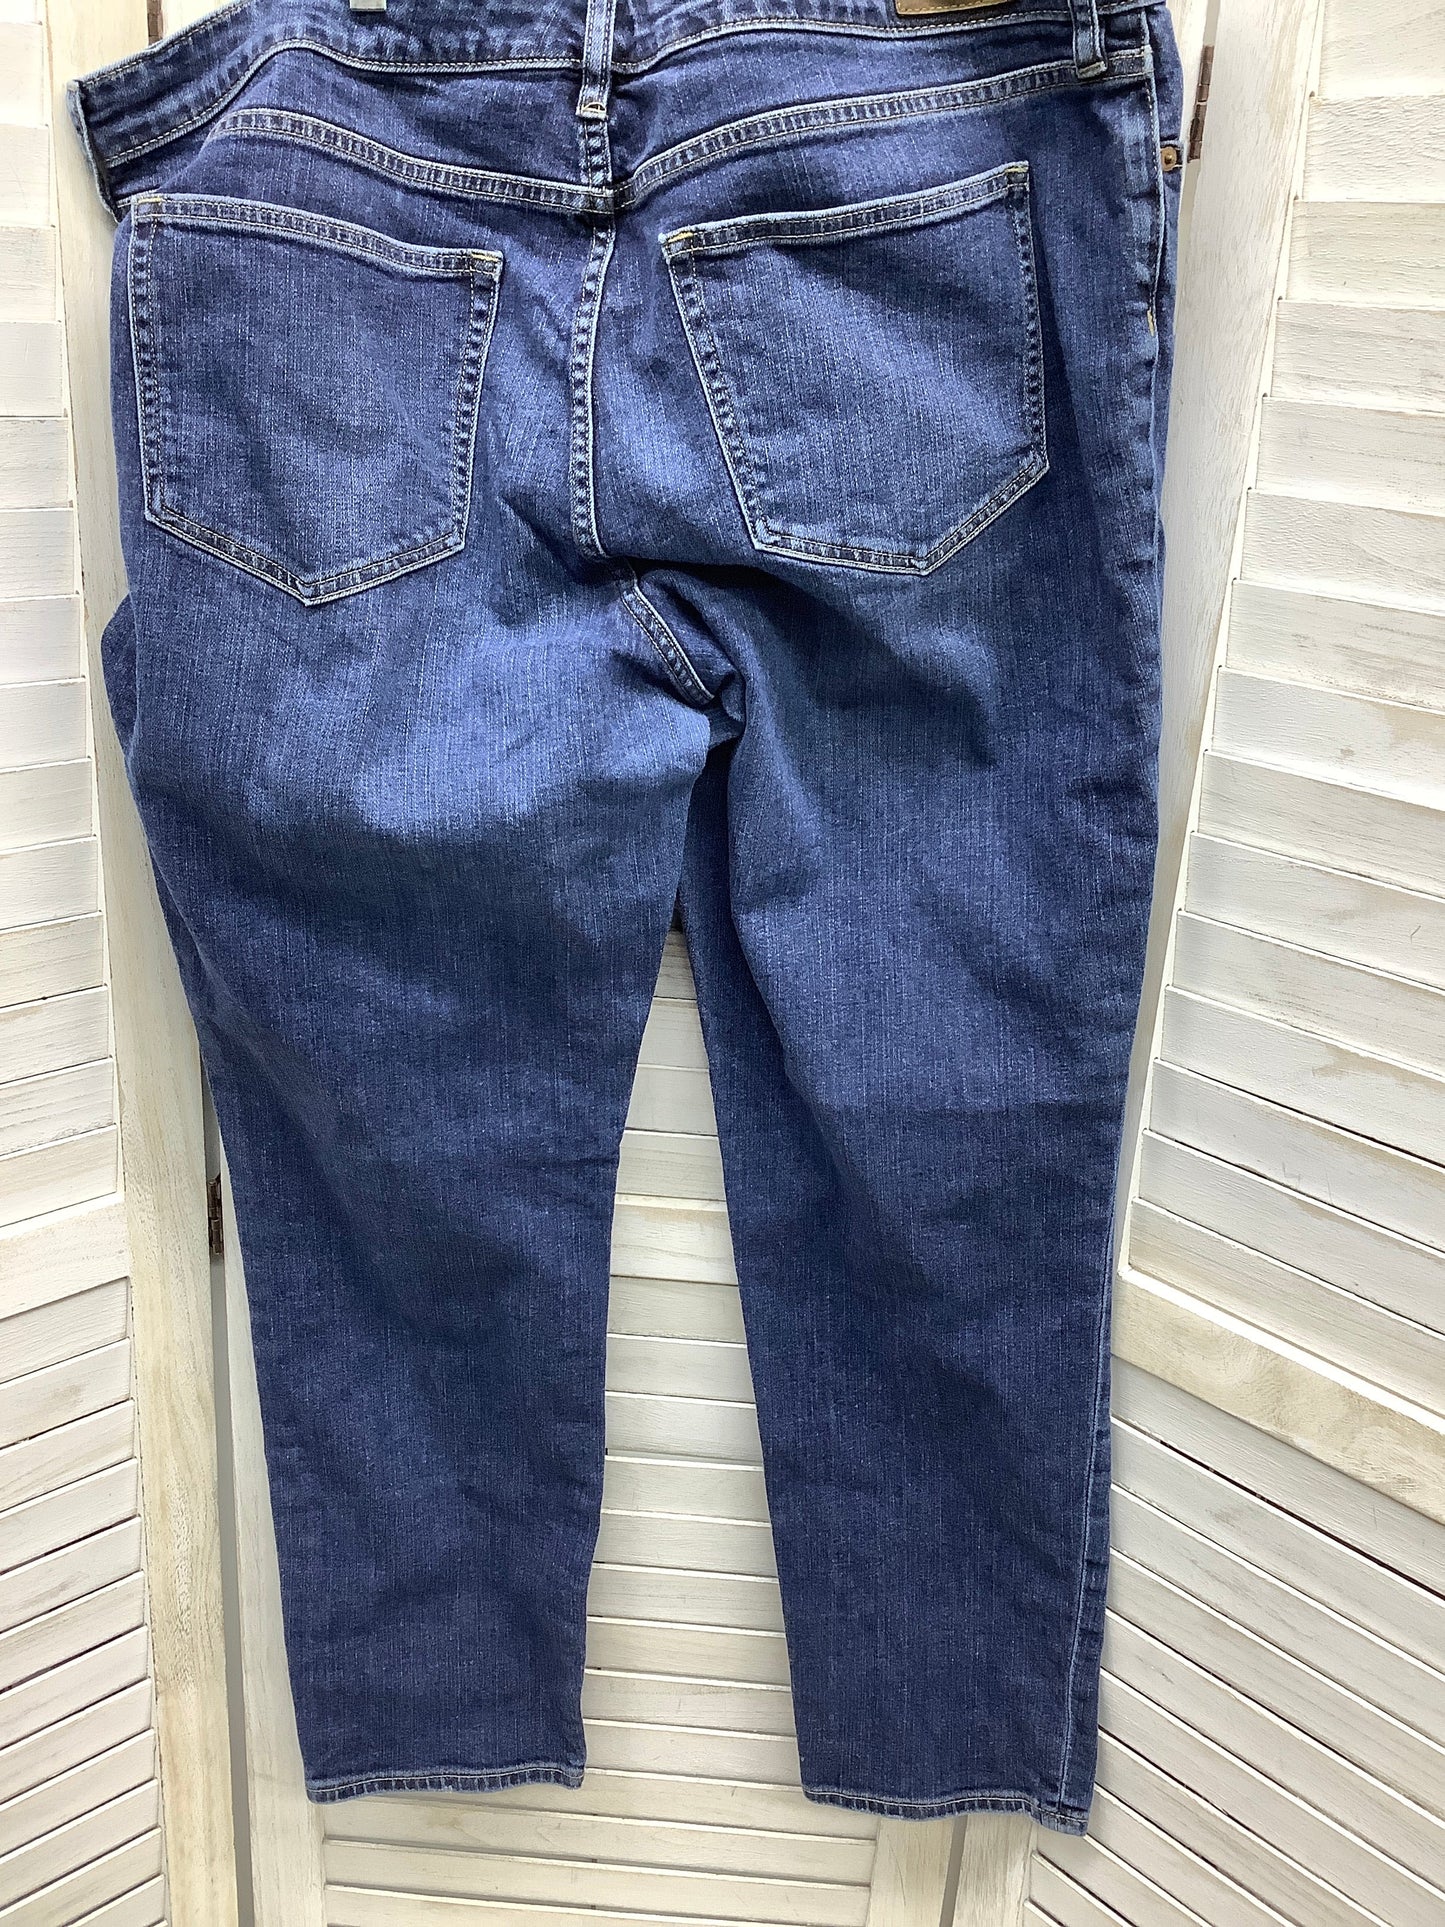 Jeans Relaxed/boyfriend By Lands End  Size: 18